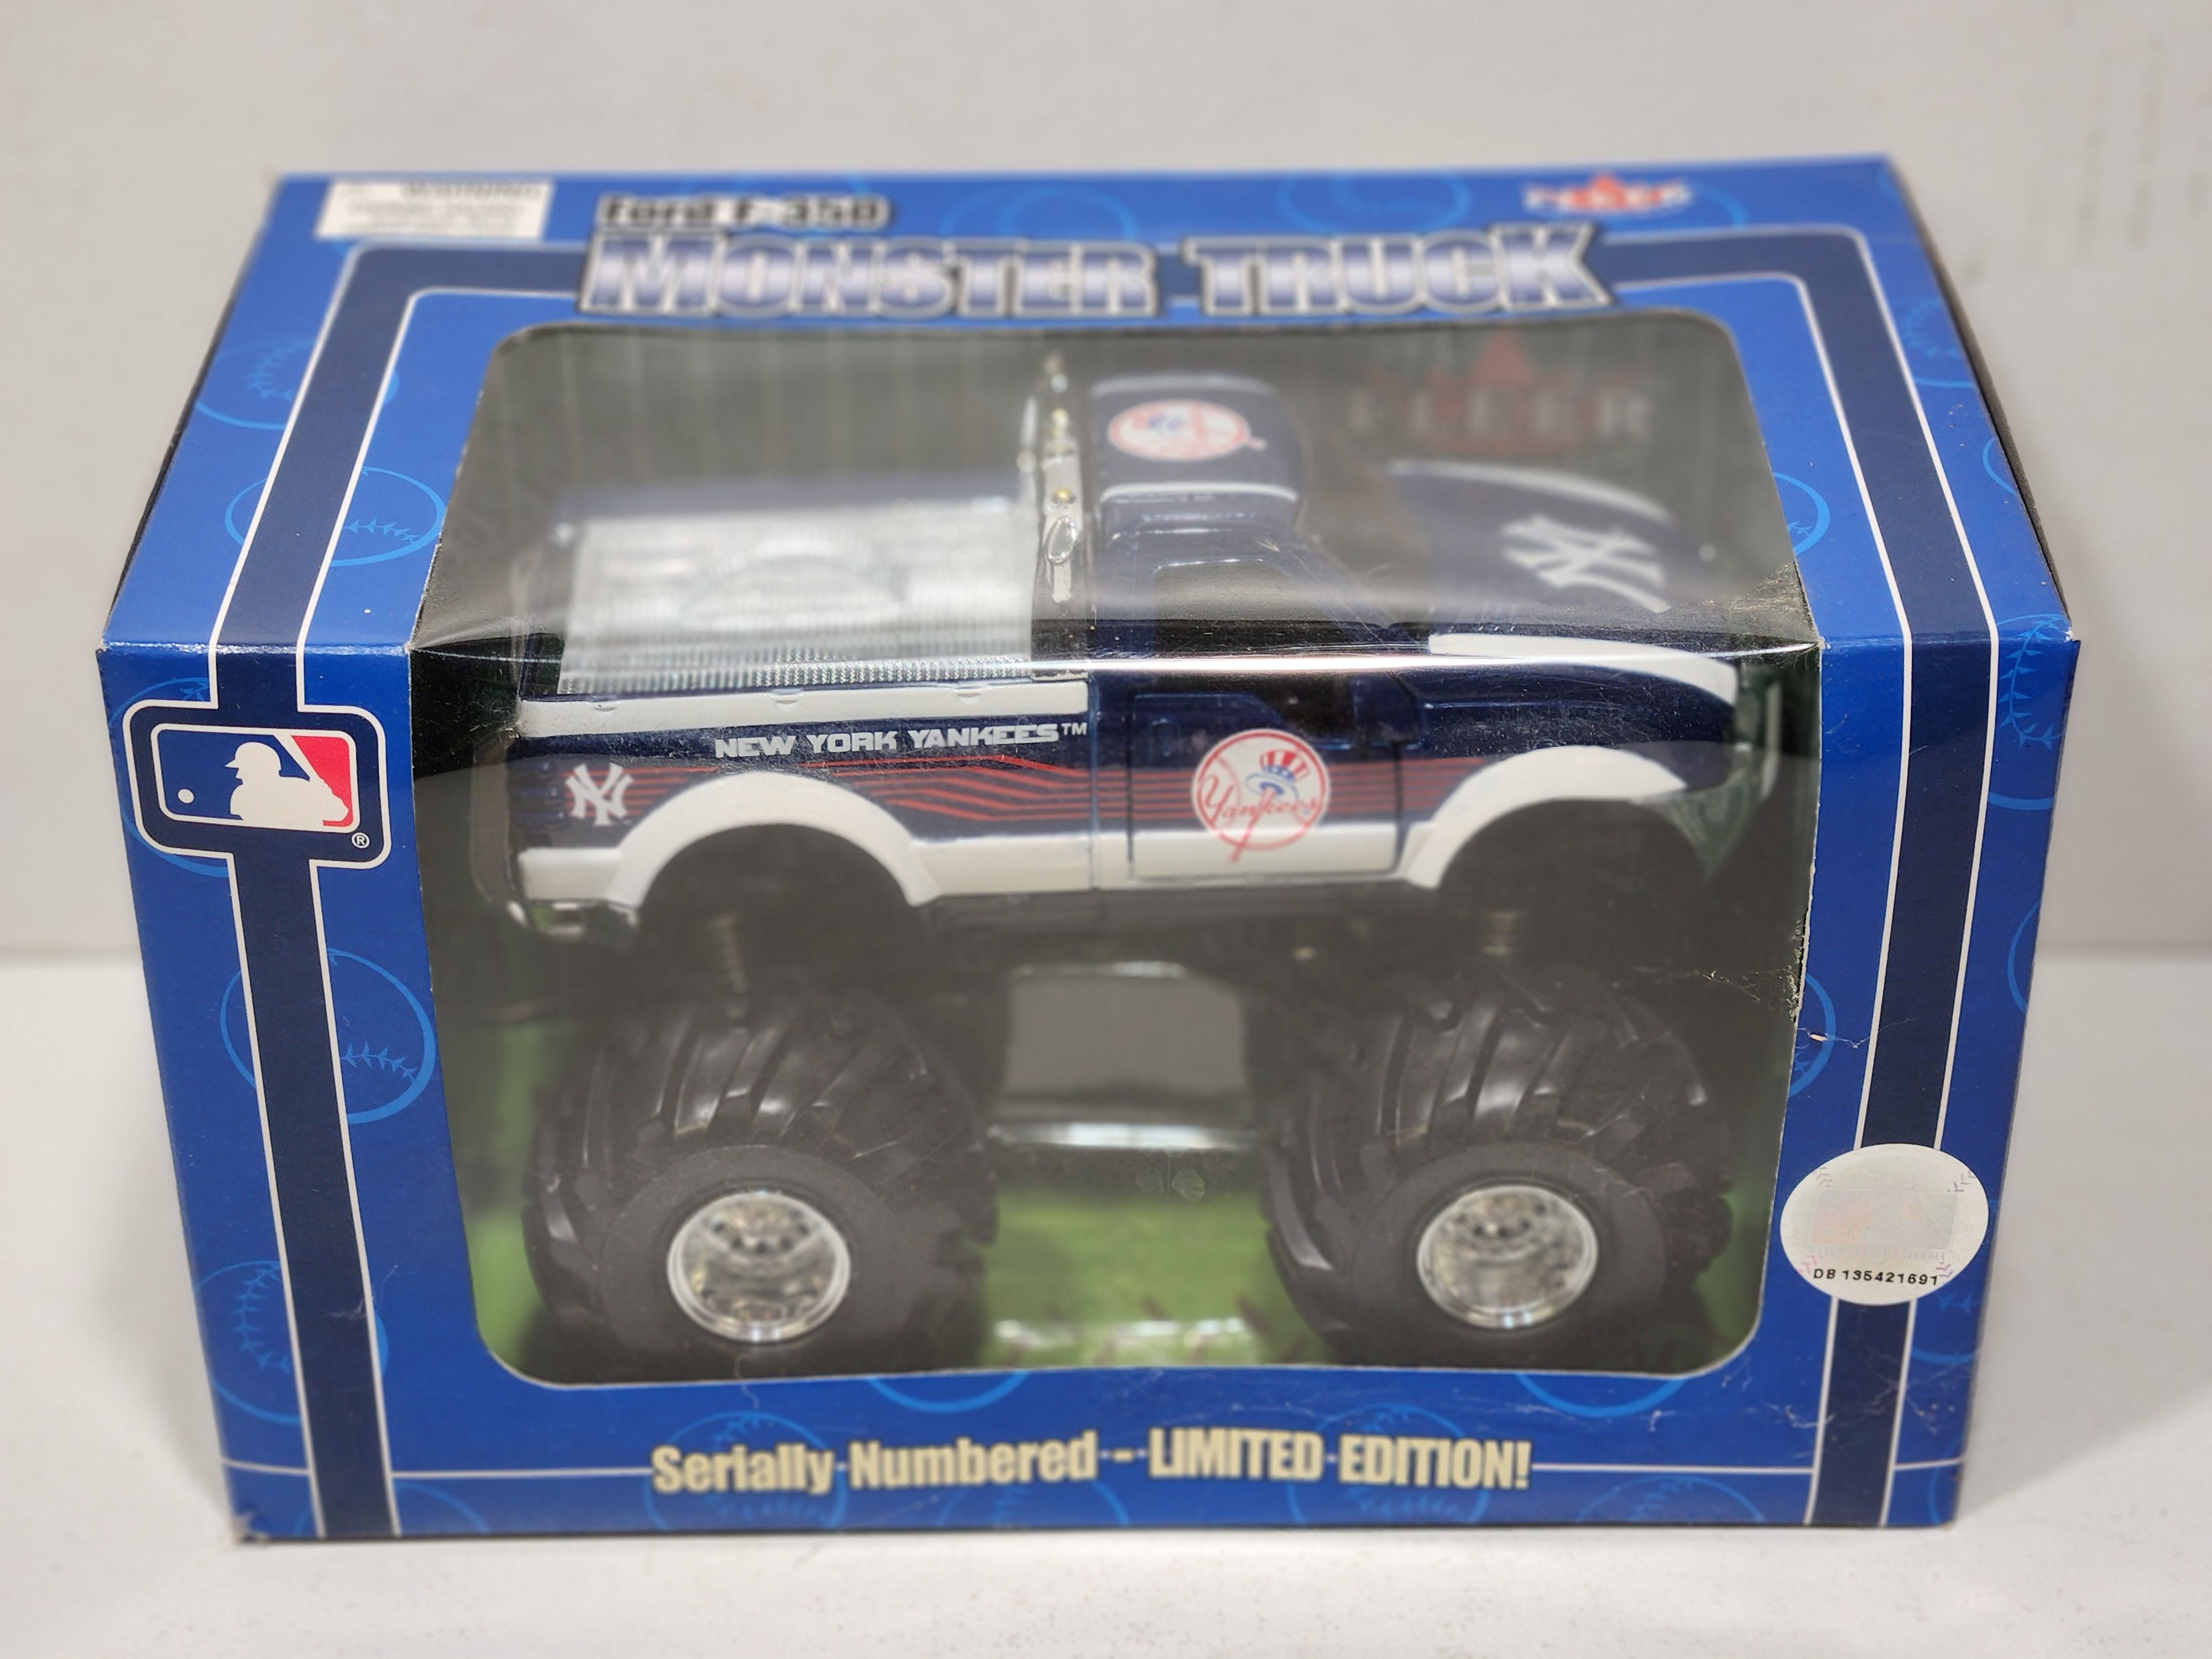 2003 New York Yankees 1/32nd Ford F-350 Monster truck